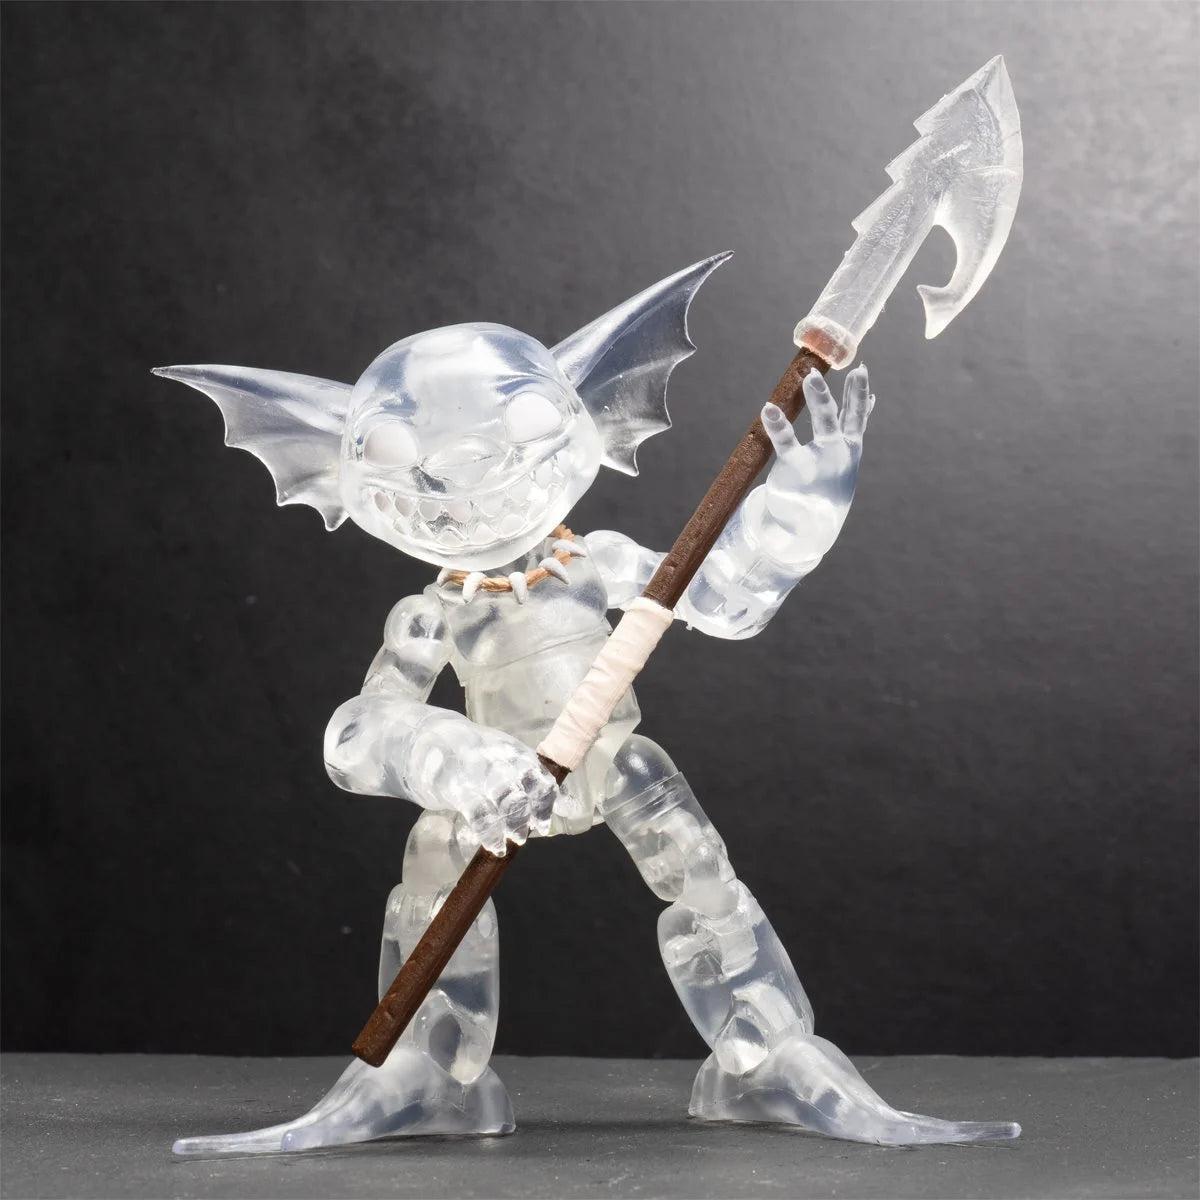 Plunderlings Drench Arctic Clear Variant 1:12 Scale Action Figure | SDCC Convention Exclusive-2